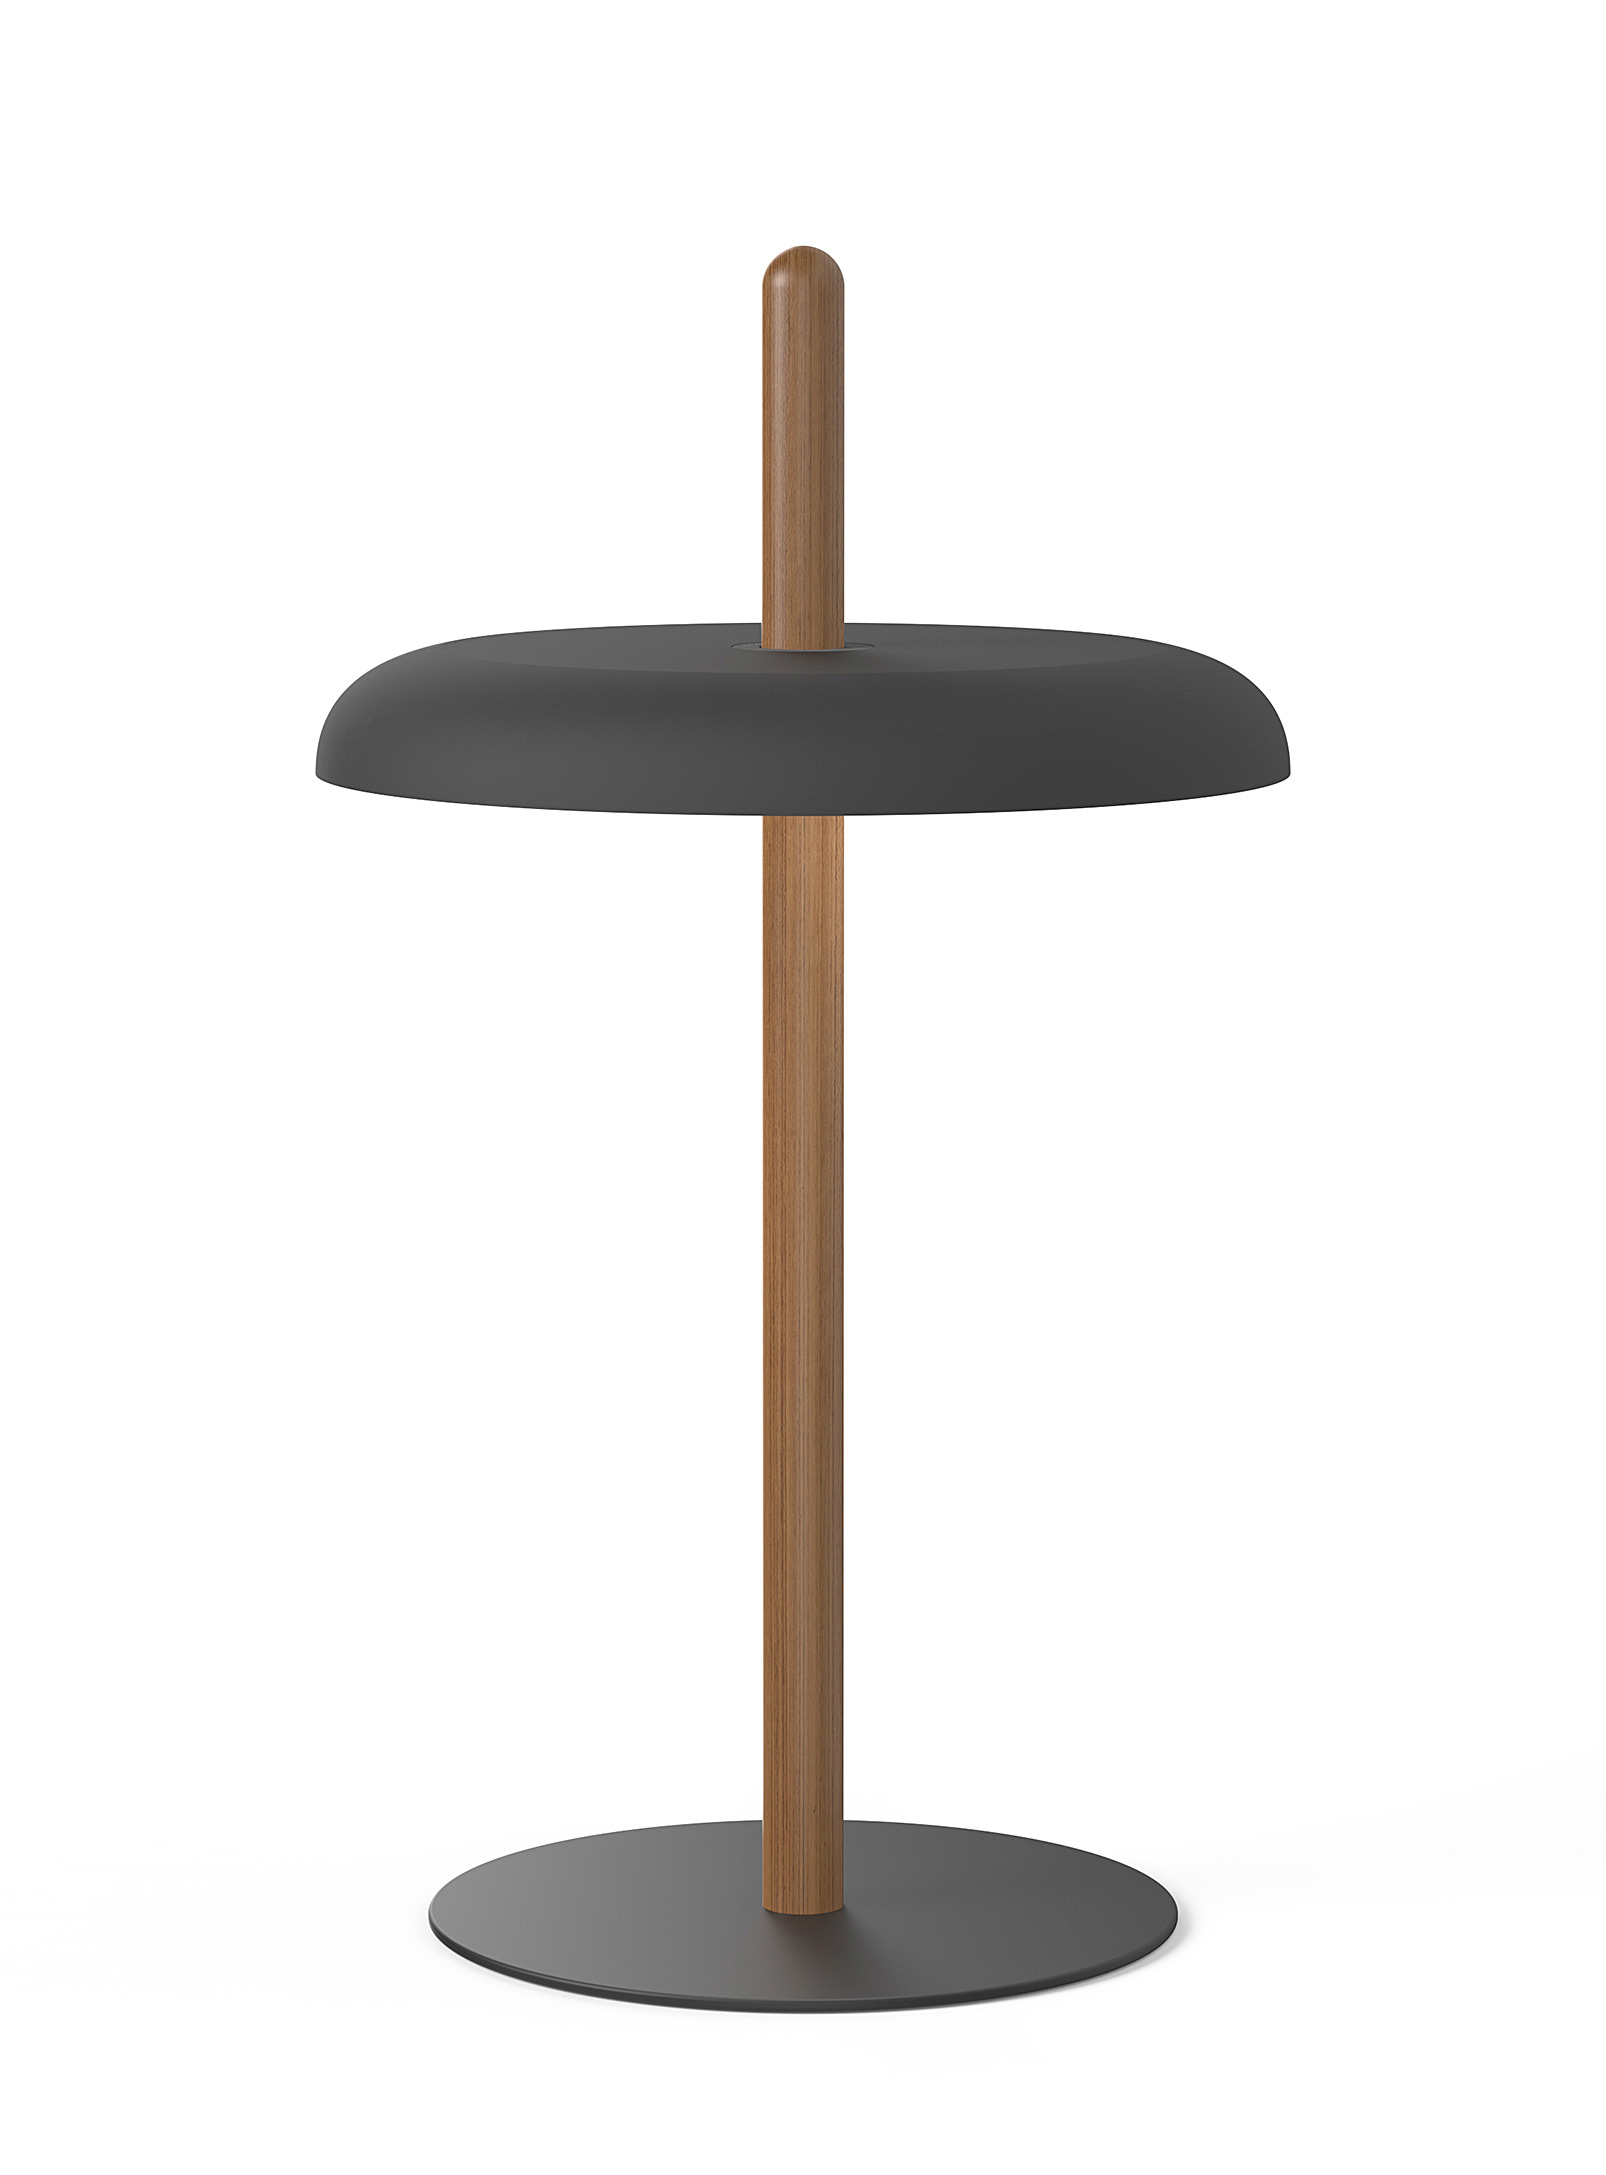 Pablo Designs Nivél Table Lamp With Solid Walnut Pole In Black